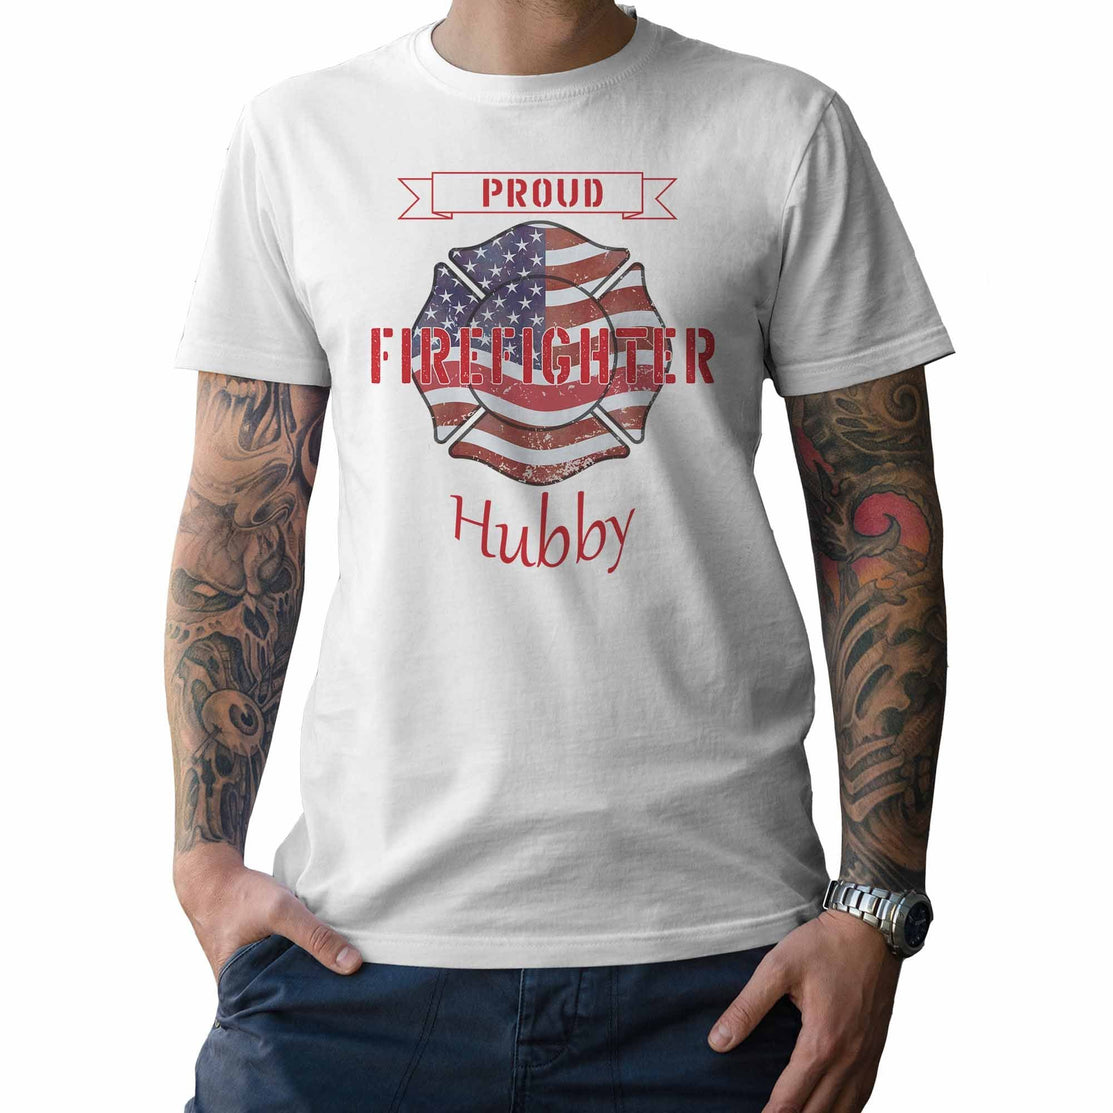 Proud Firefighter Hubby - My Custom Tee Party